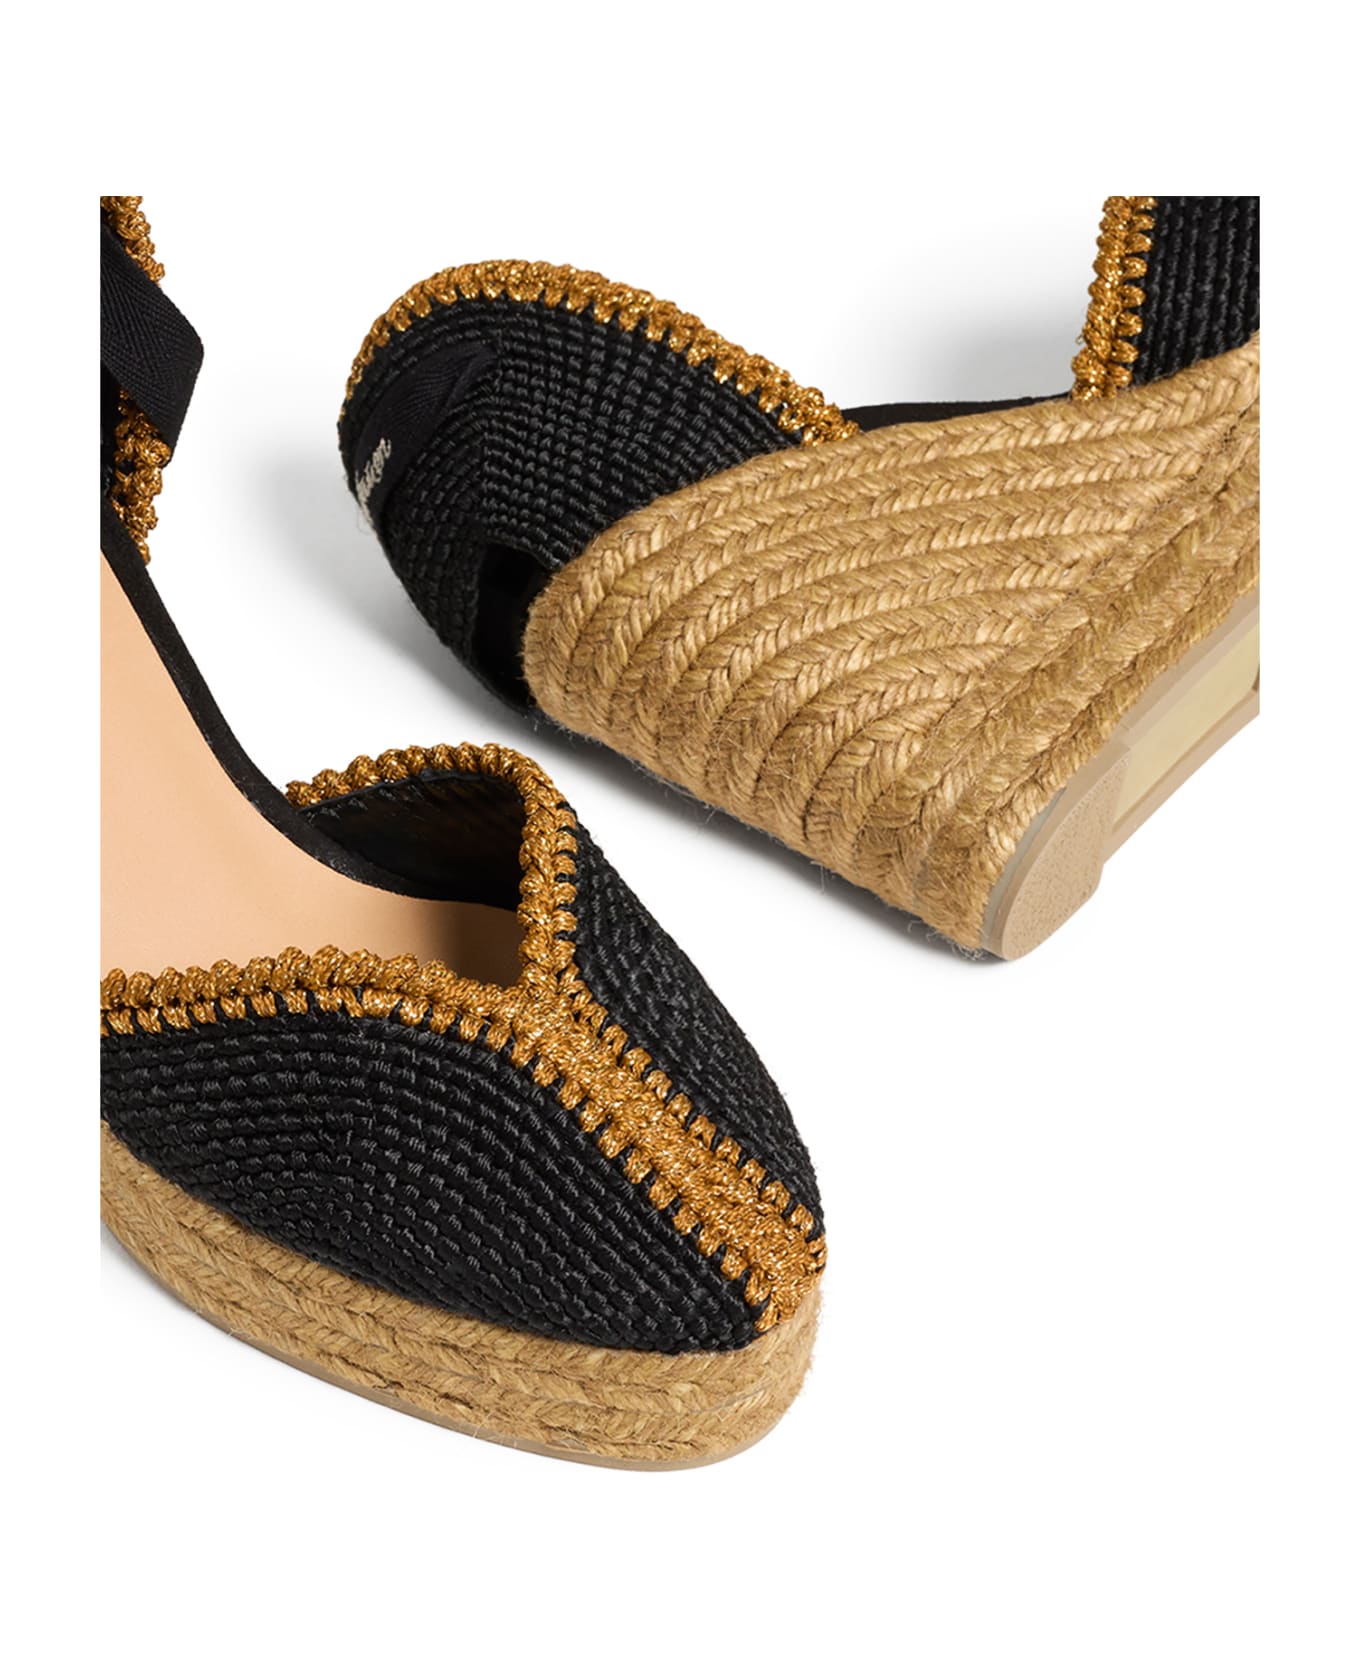 Castañer Espadrilles Coeur With Wedge And Laces - FANTASIA NEGRO ウェッジシューズ